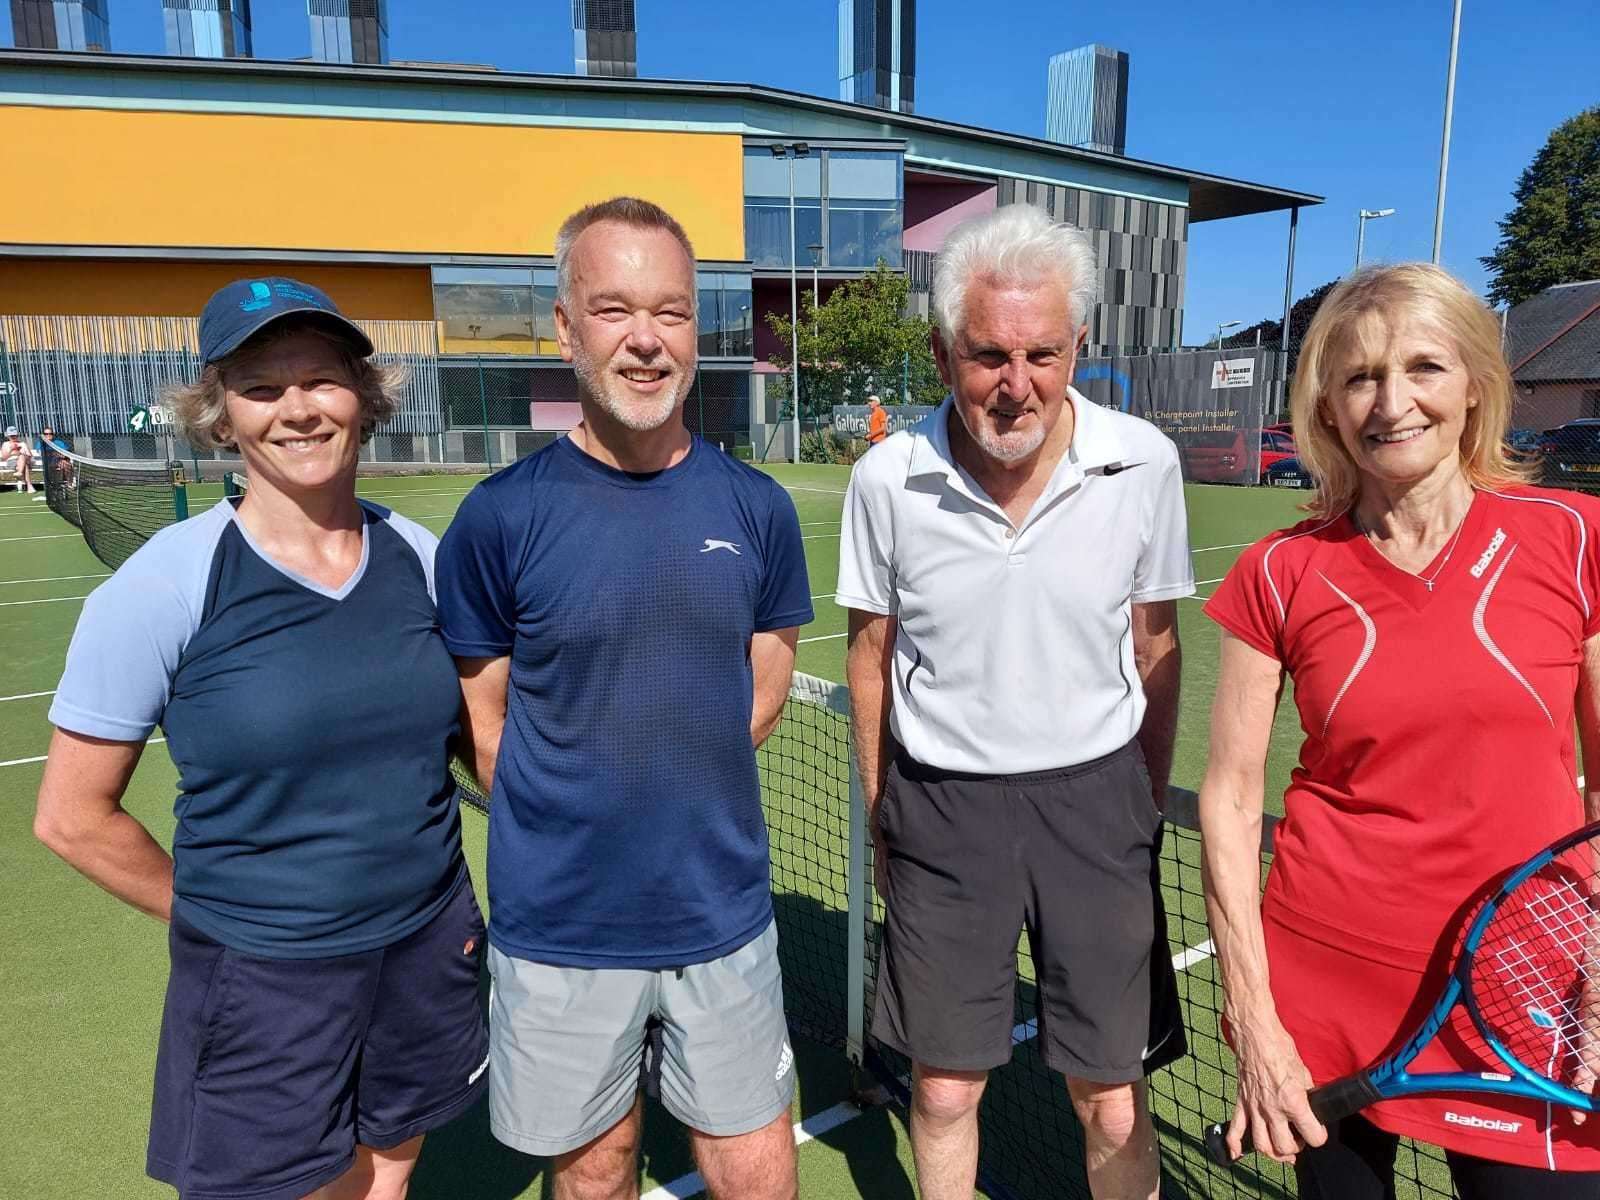 Deborah Macrae and Danny Gillson won the 100+ competition at the Inverness Tennis Club Championships.